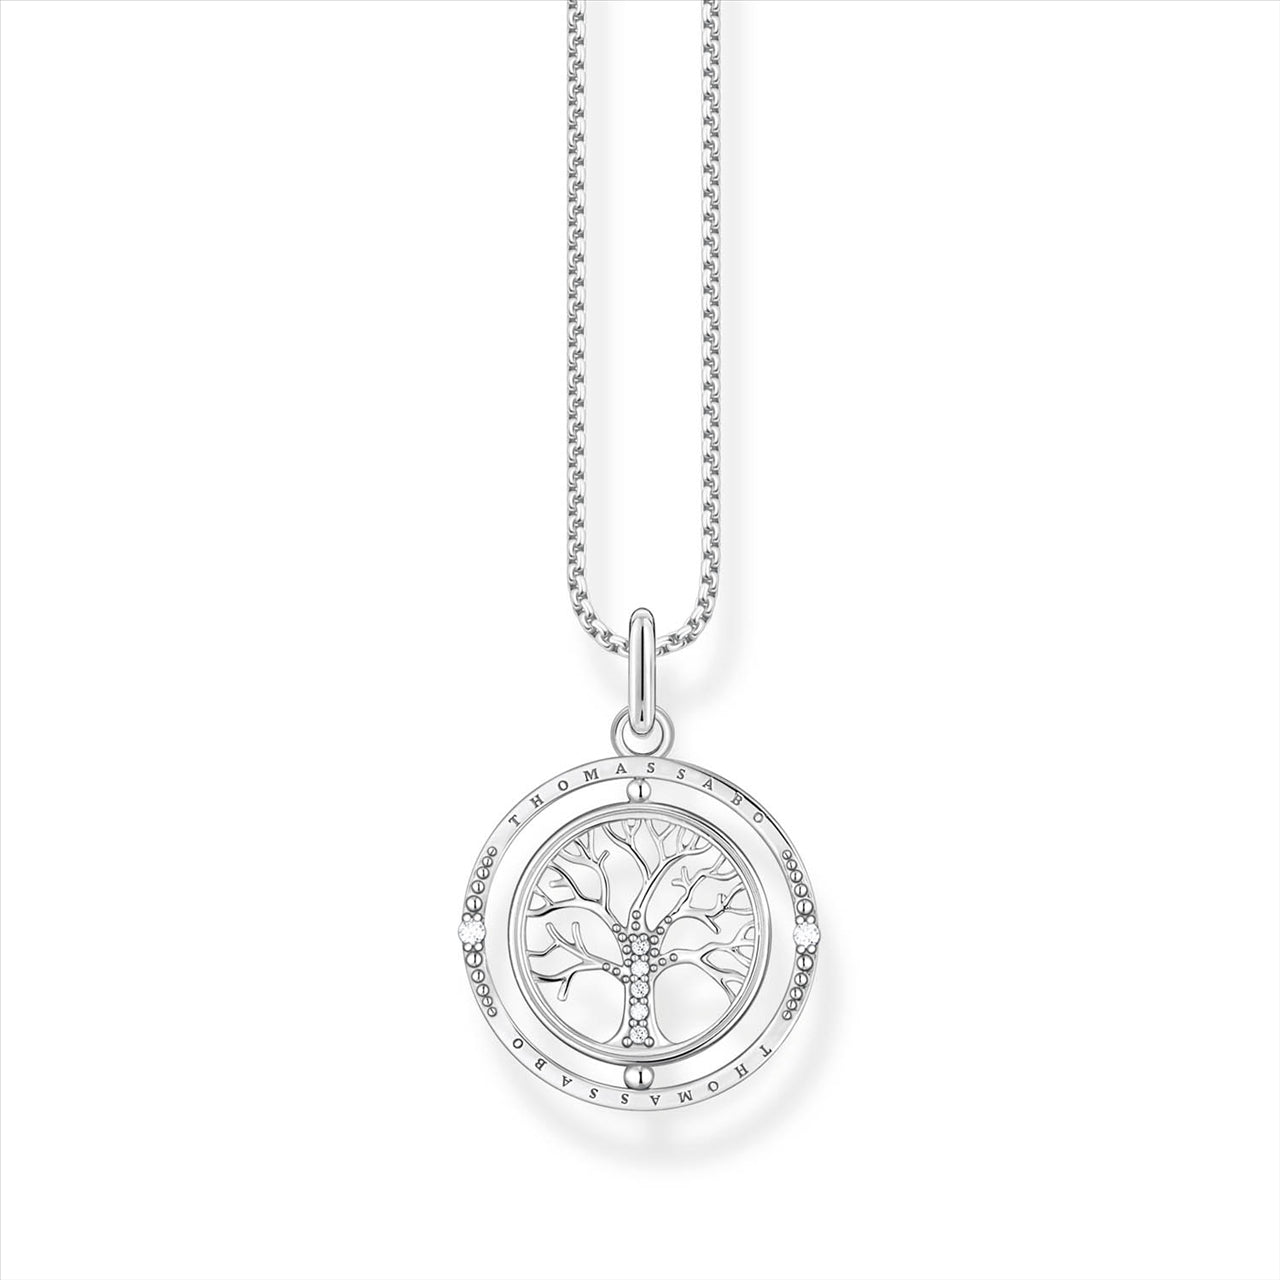 Thomas Sabo "Tree Of Love" Spinner Necklace